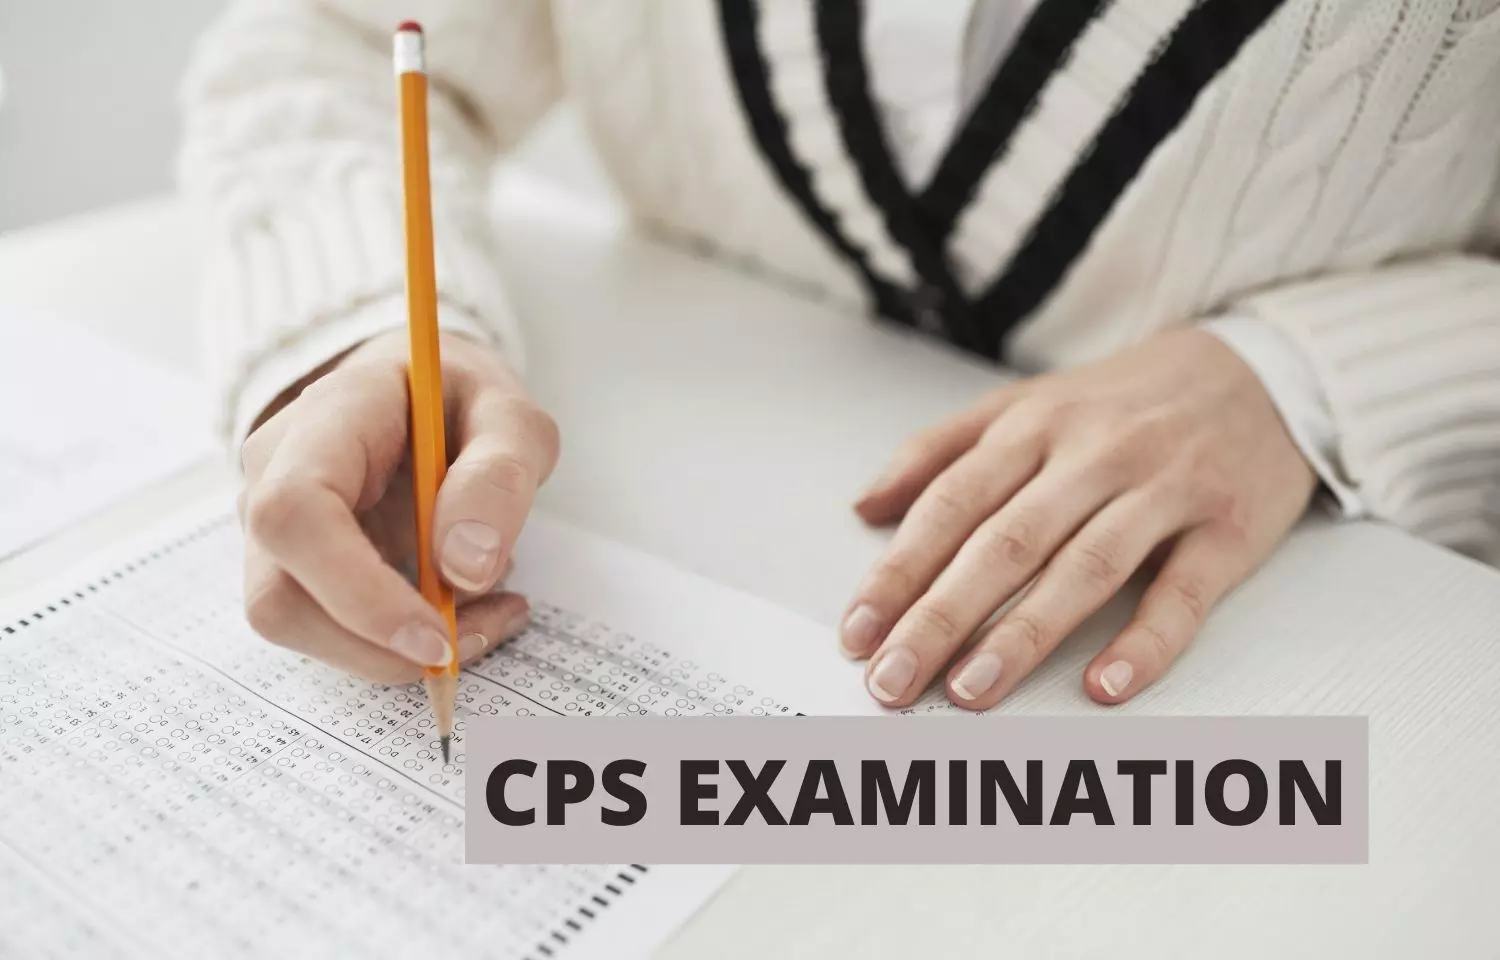 Permission forms for CPS November 2021 exams available, submit now